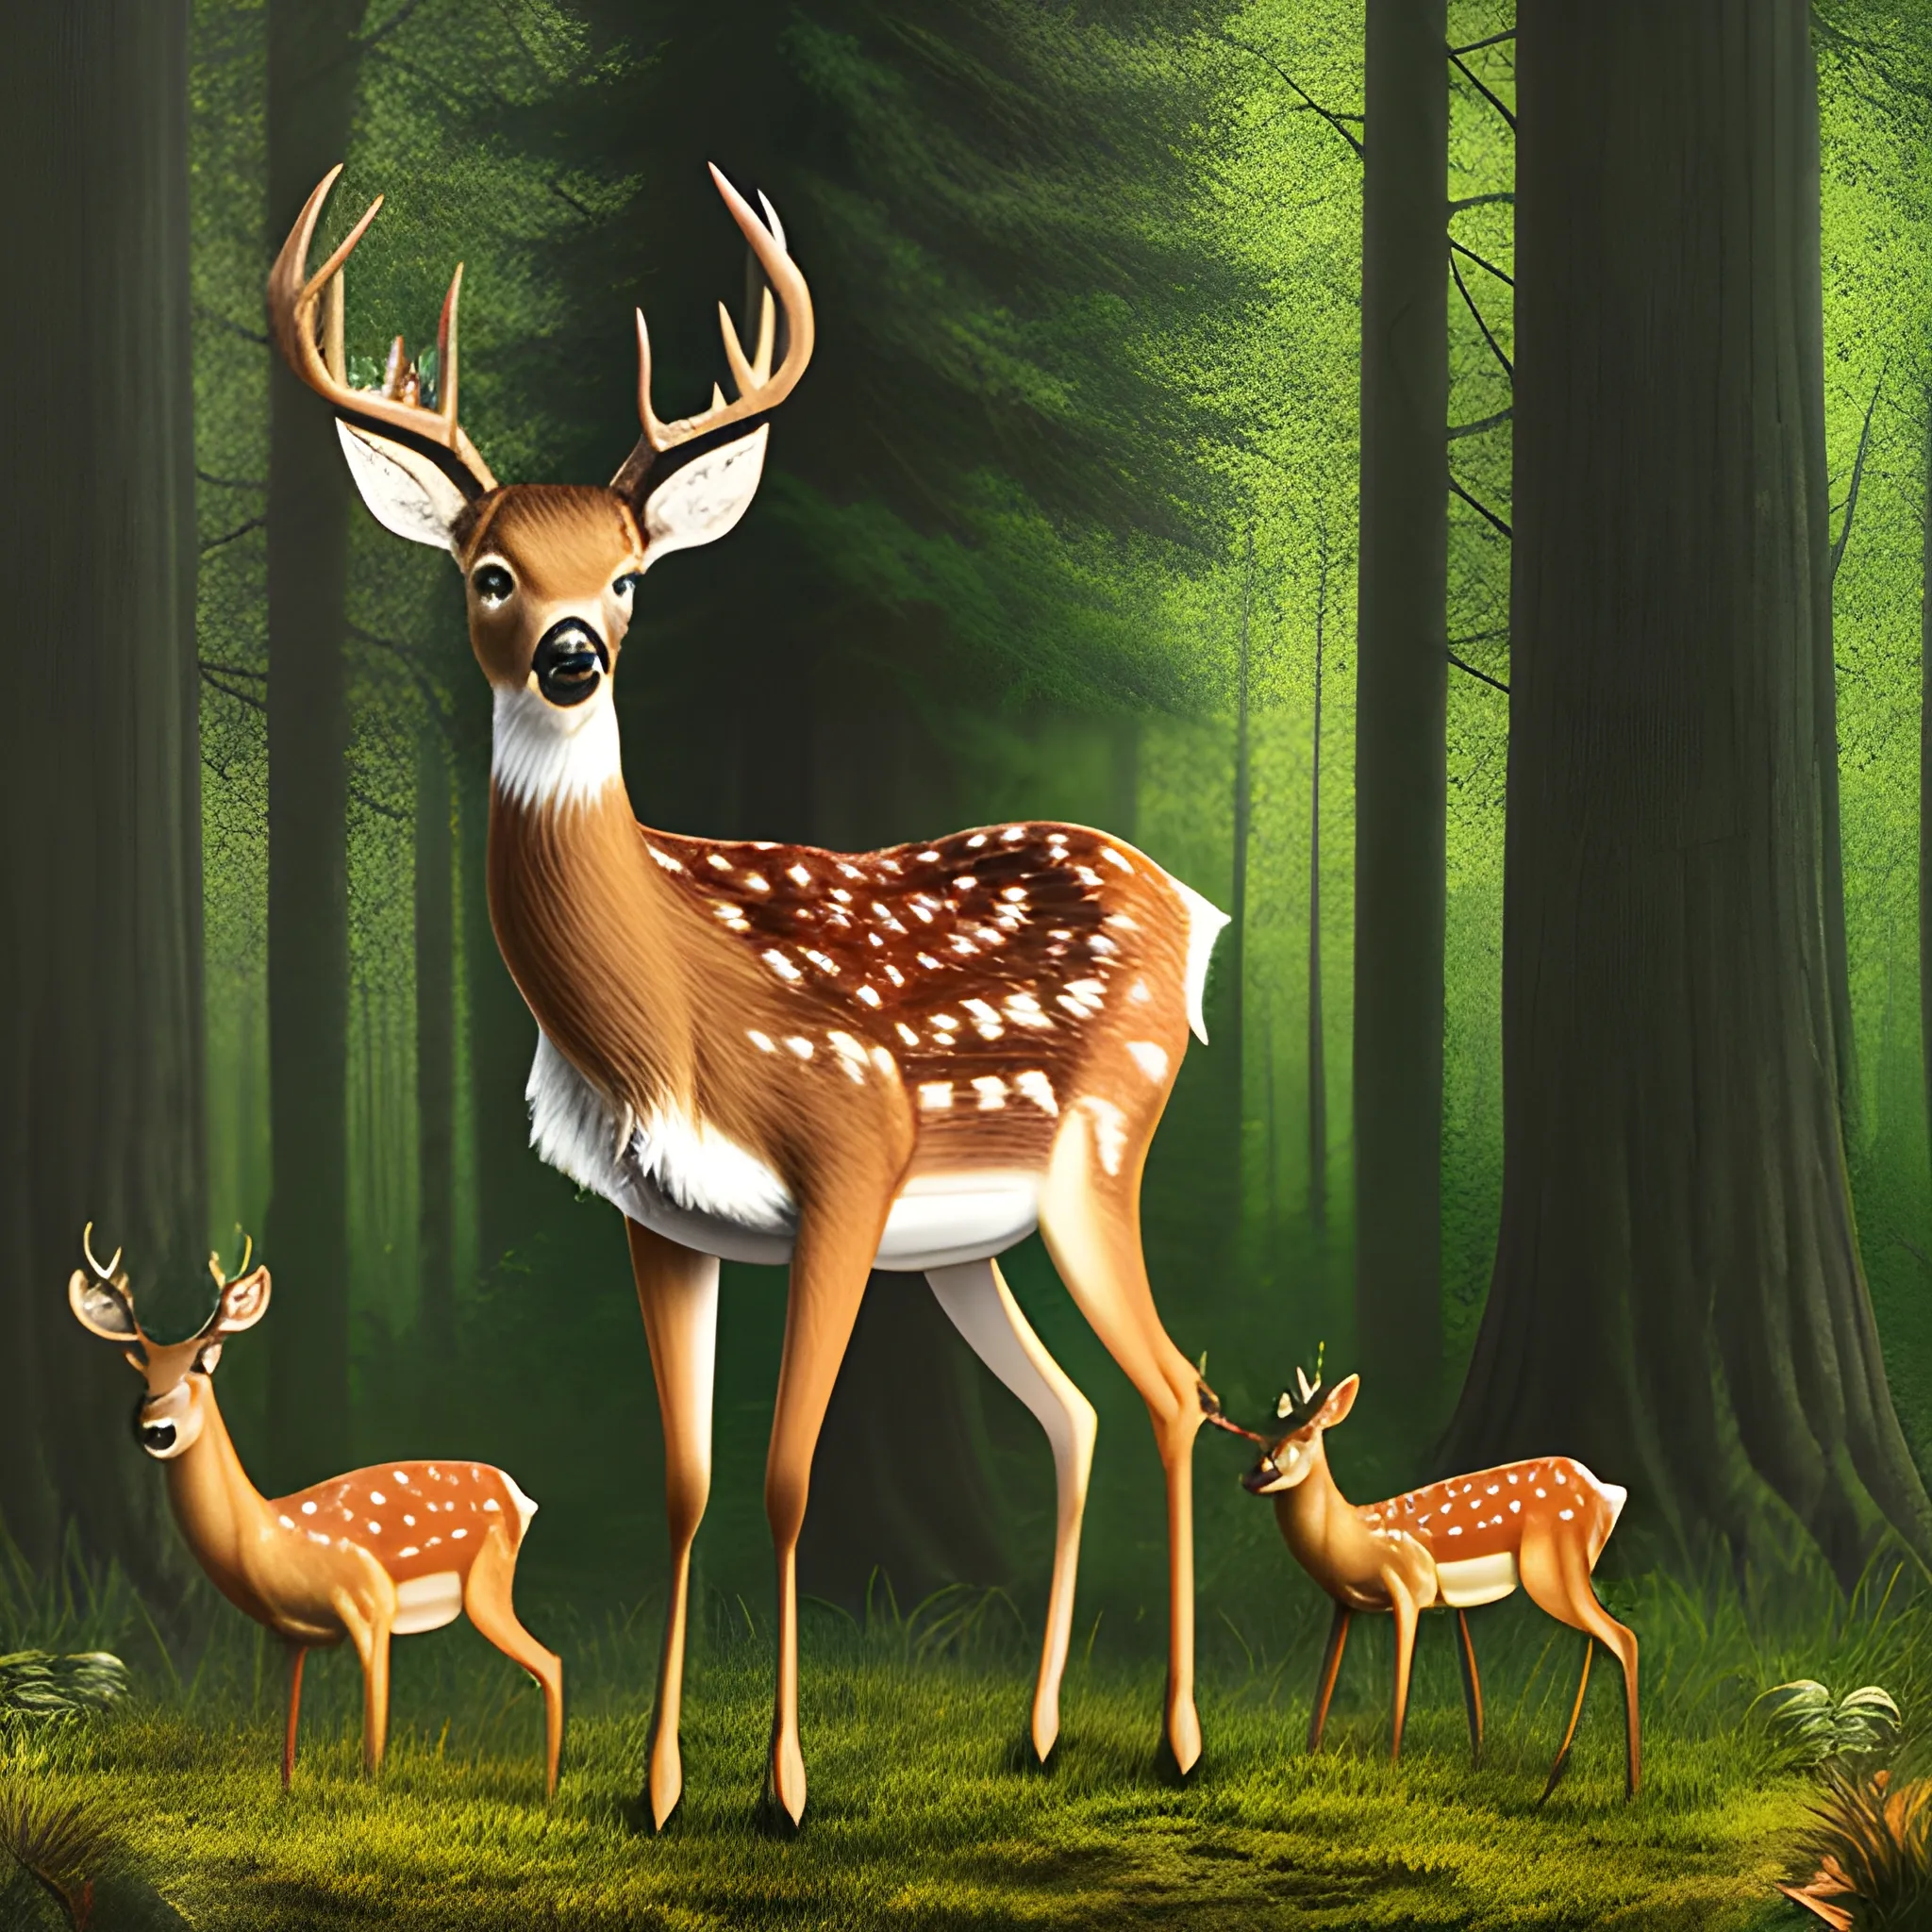 Deer in the forest
